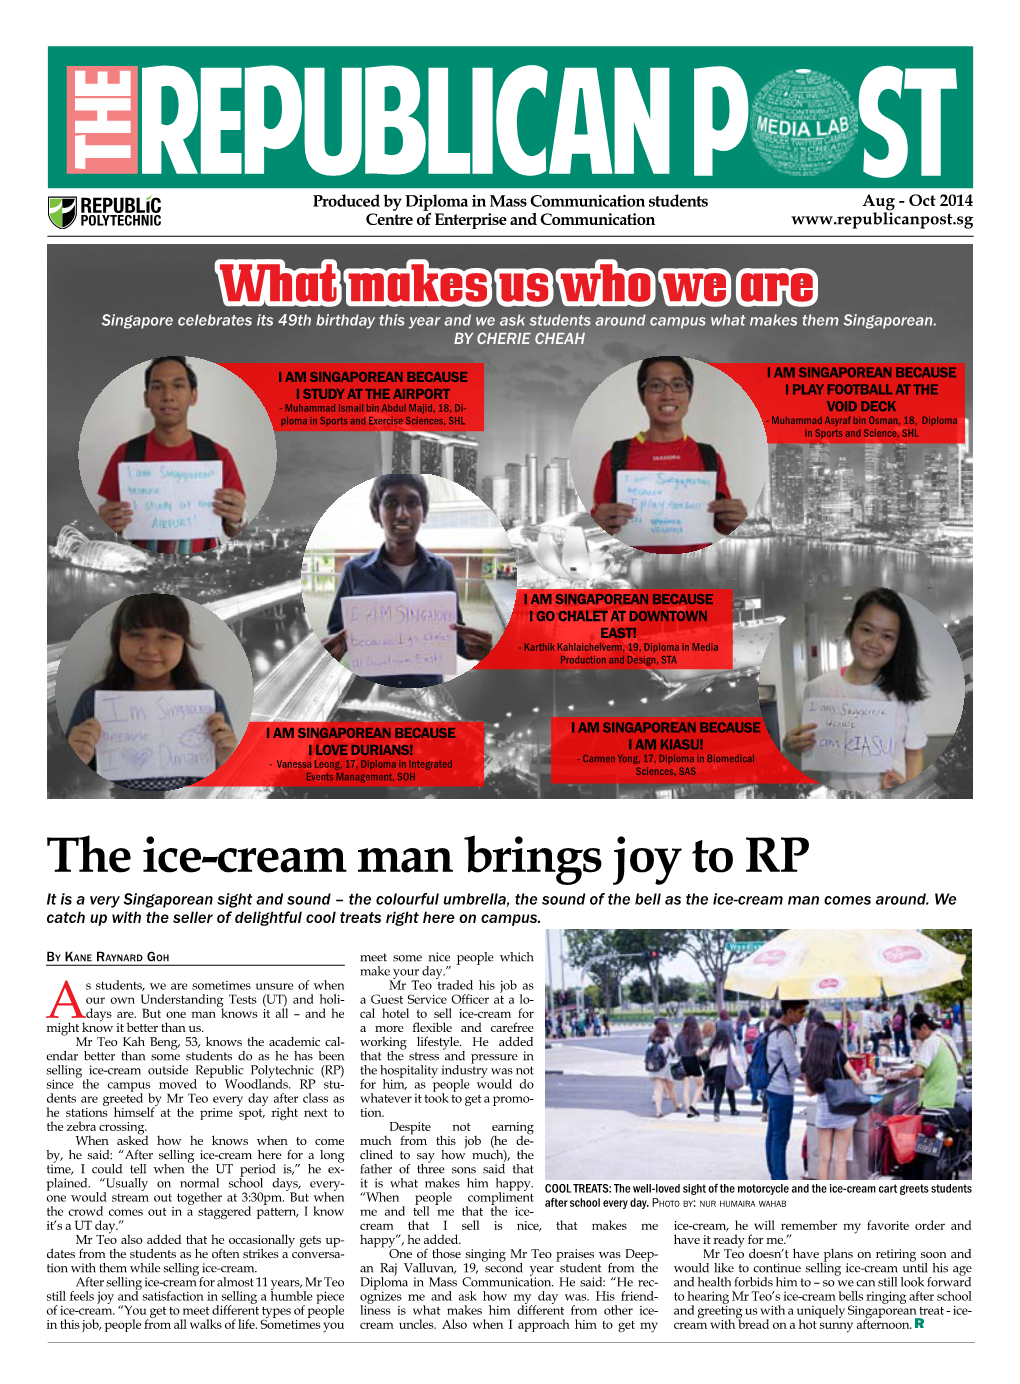 The Ice-Cream Man Brings Joy to RP It Is a Very Singaporean Sight and Sound – the Colourful Umbrella, the Sound of the Bell As the Ice-Cream Man Comes Around